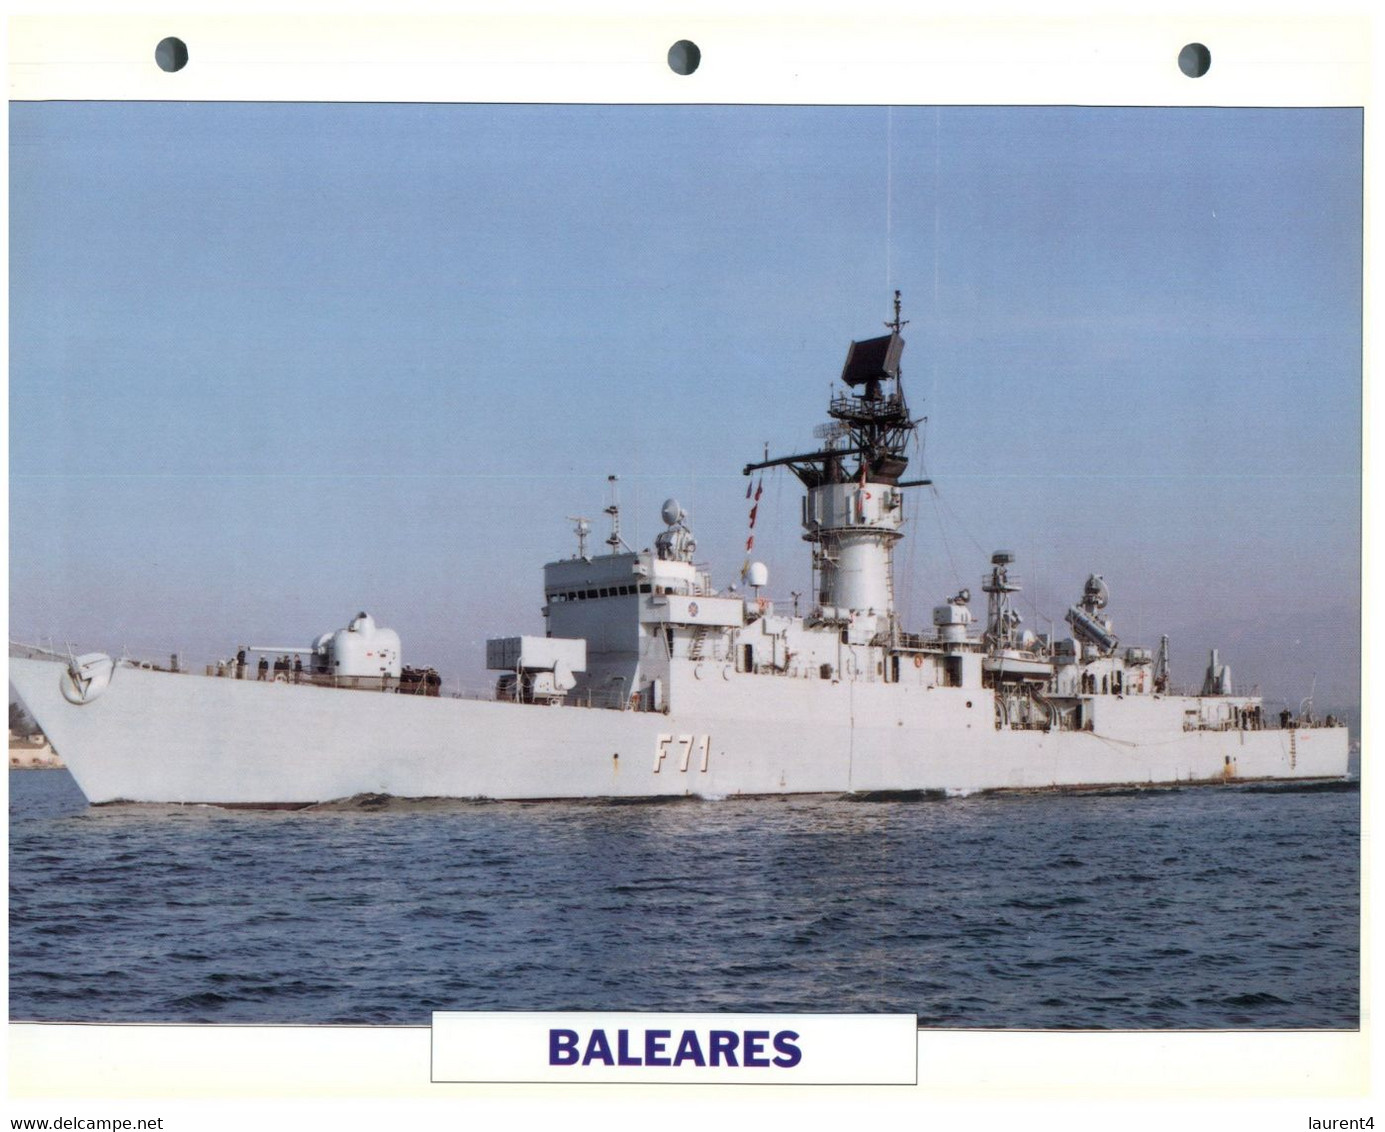 (25 X 19 Cm) (8-9-2021) - T - Photo And Info Sheet On Warship - Spain Navy - Baleares - Bateaux